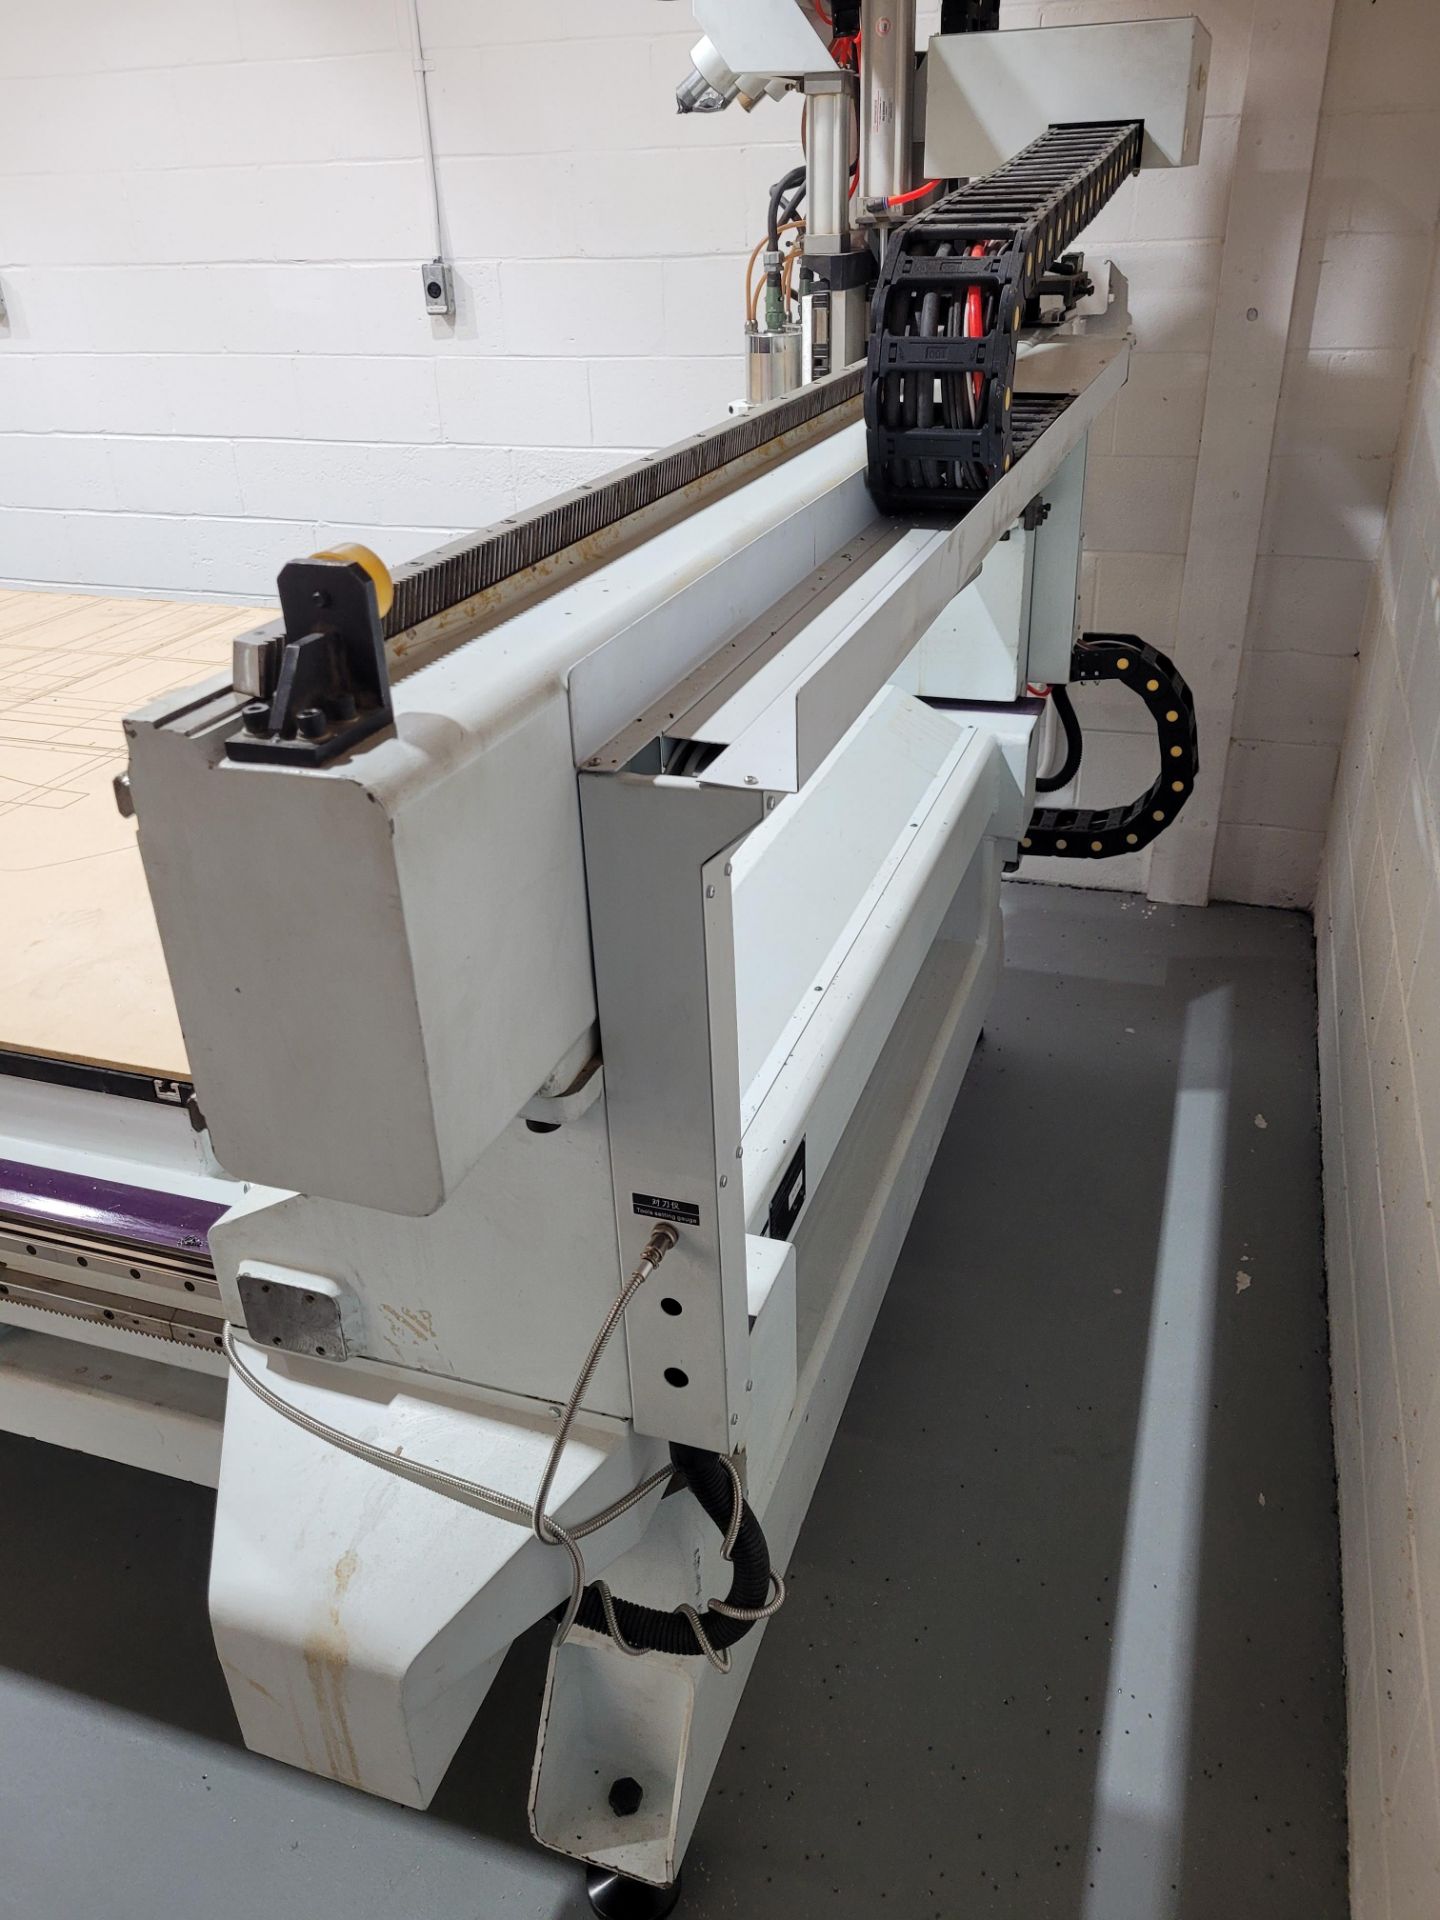 2015 SUDA ATC CNC Router mod. MG1630C, 3-Head System with Accessories and CRAFTEX mod. FM-300 Collec - Image 7 of 51